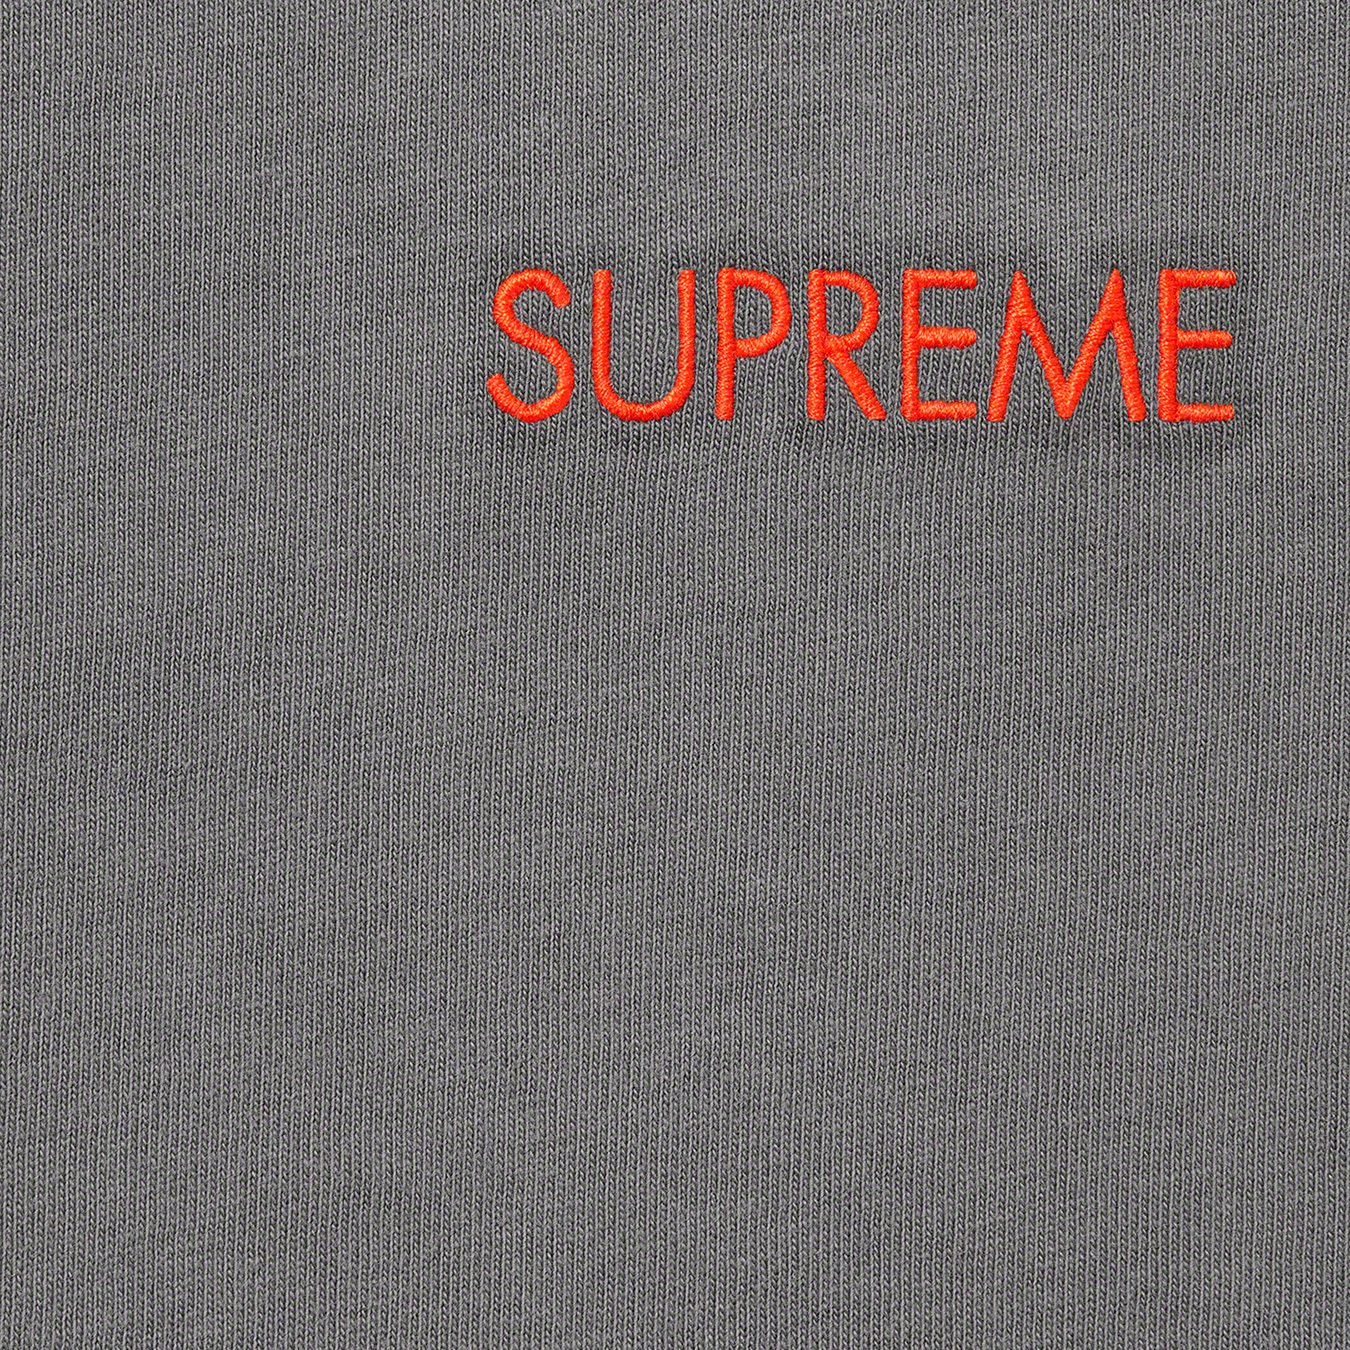 Washed Capital S S Top   fall winter    Supreme